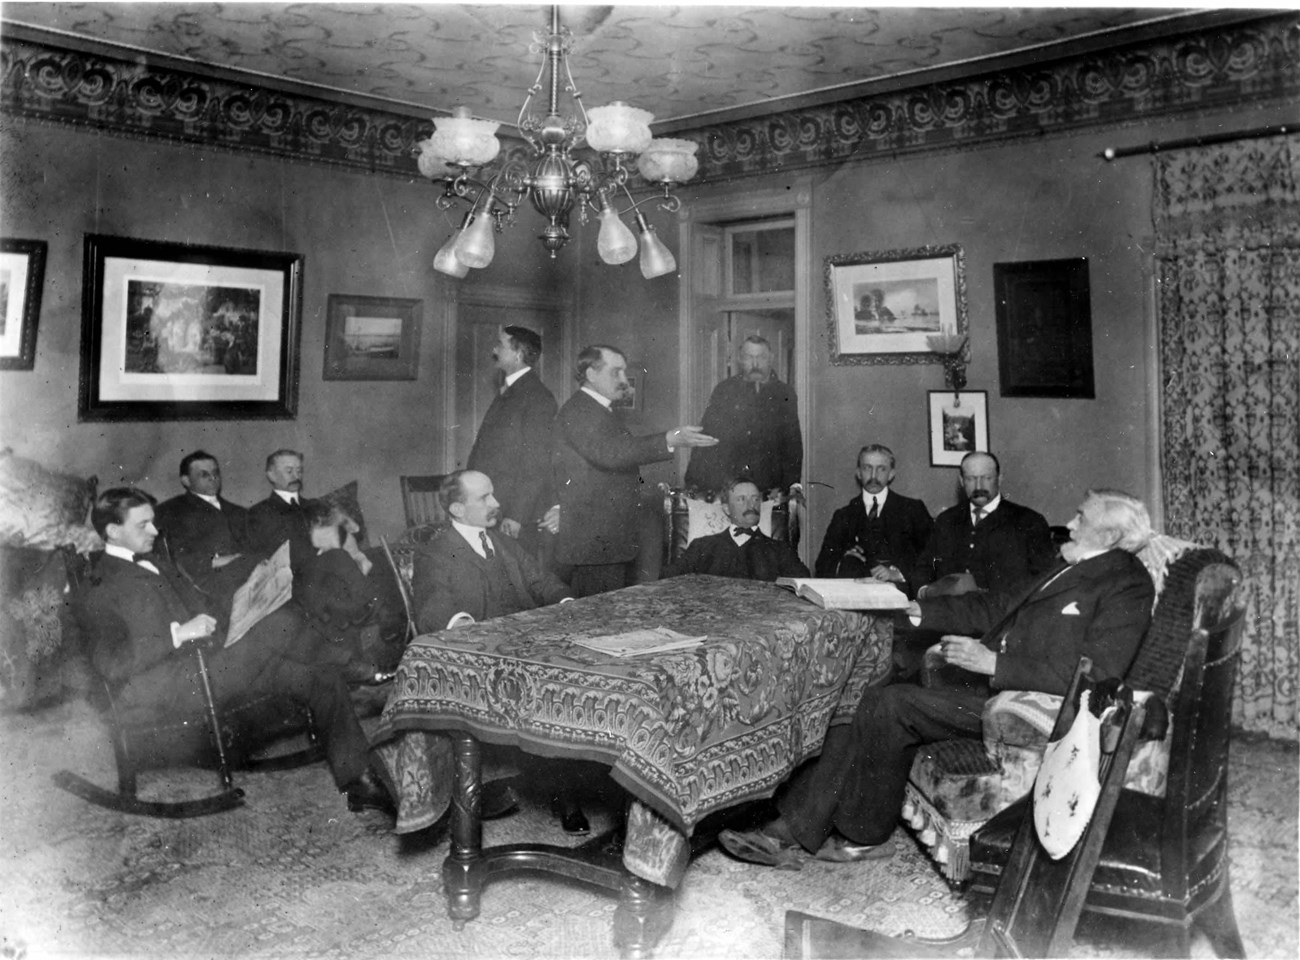 Historic photograph shows a group of well dressed men sitting around an ornate wooden table covered in a fine tablecloth in a richly furnished room.